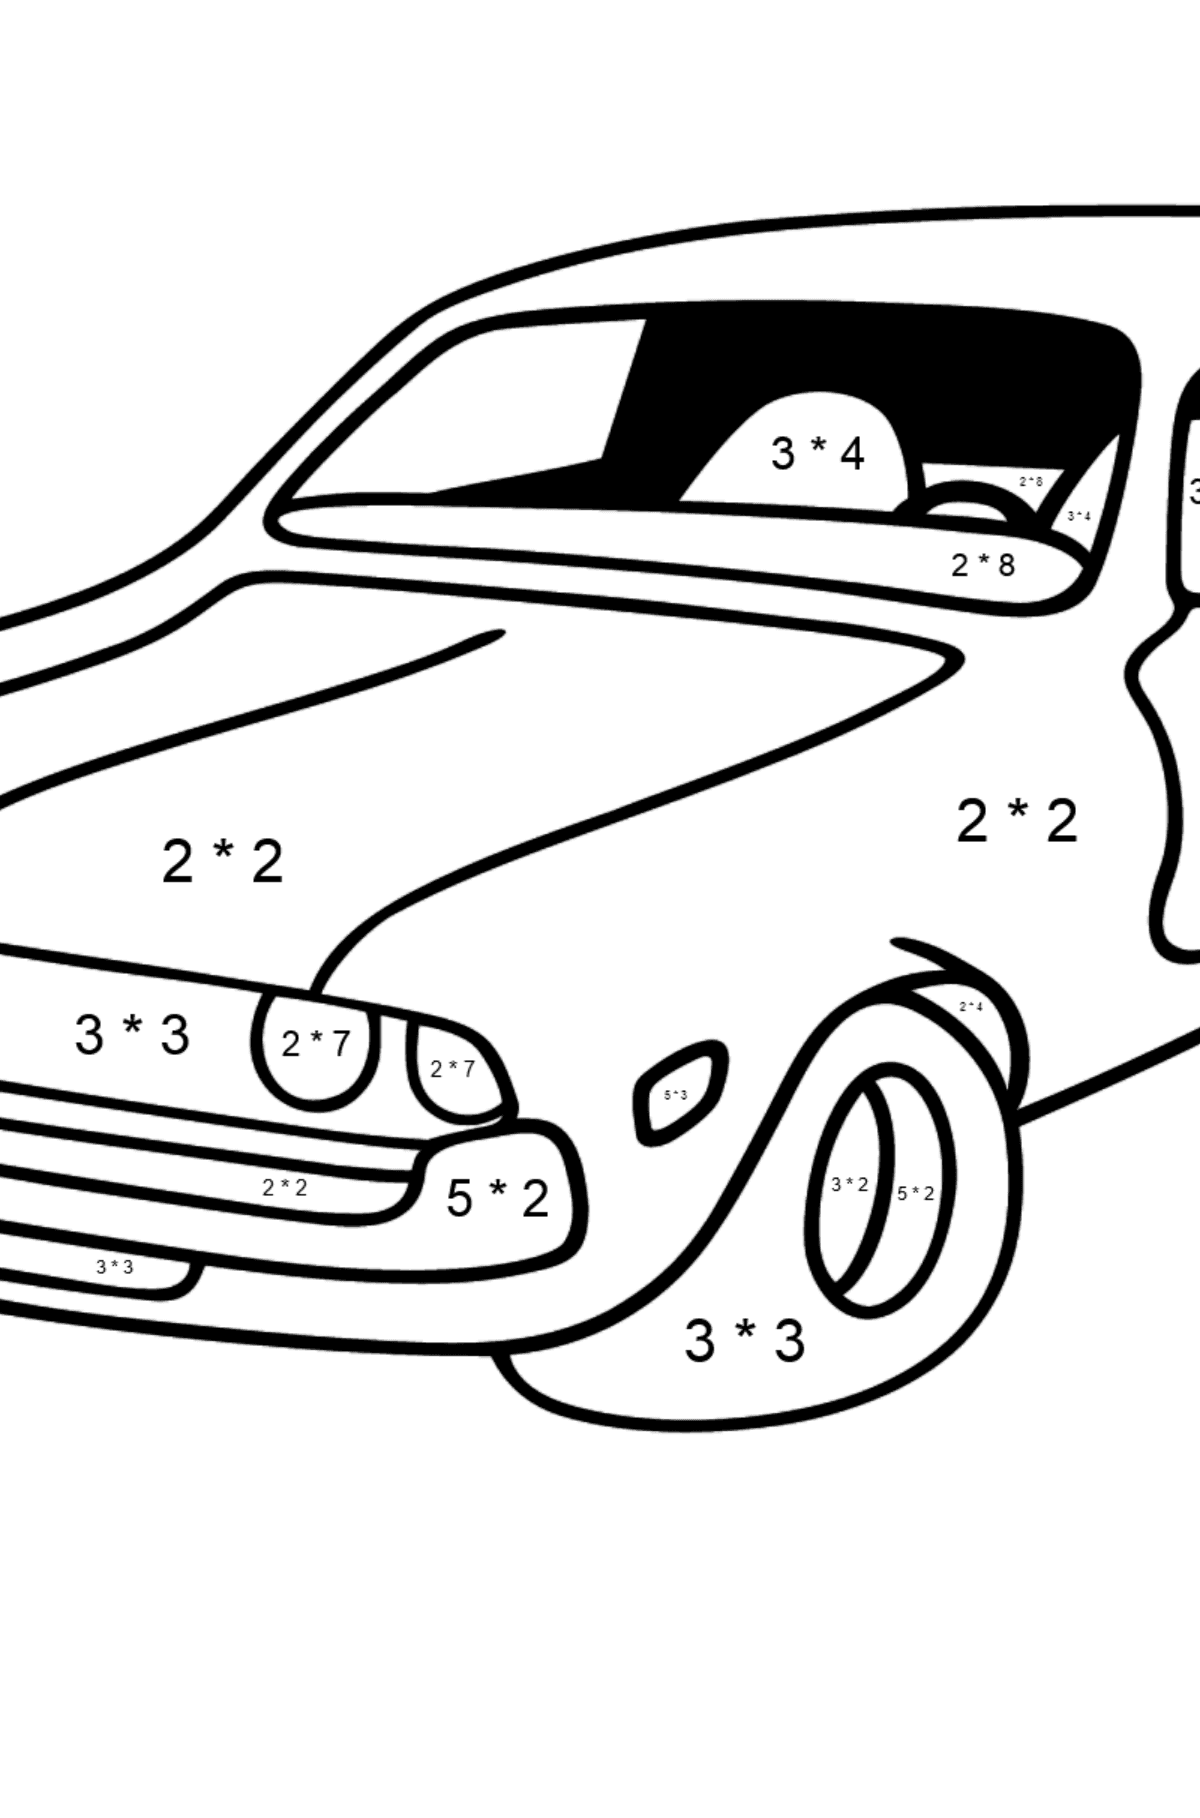 Chevrolet gray car coloring page - Math Coloring - Multiplication for Kids